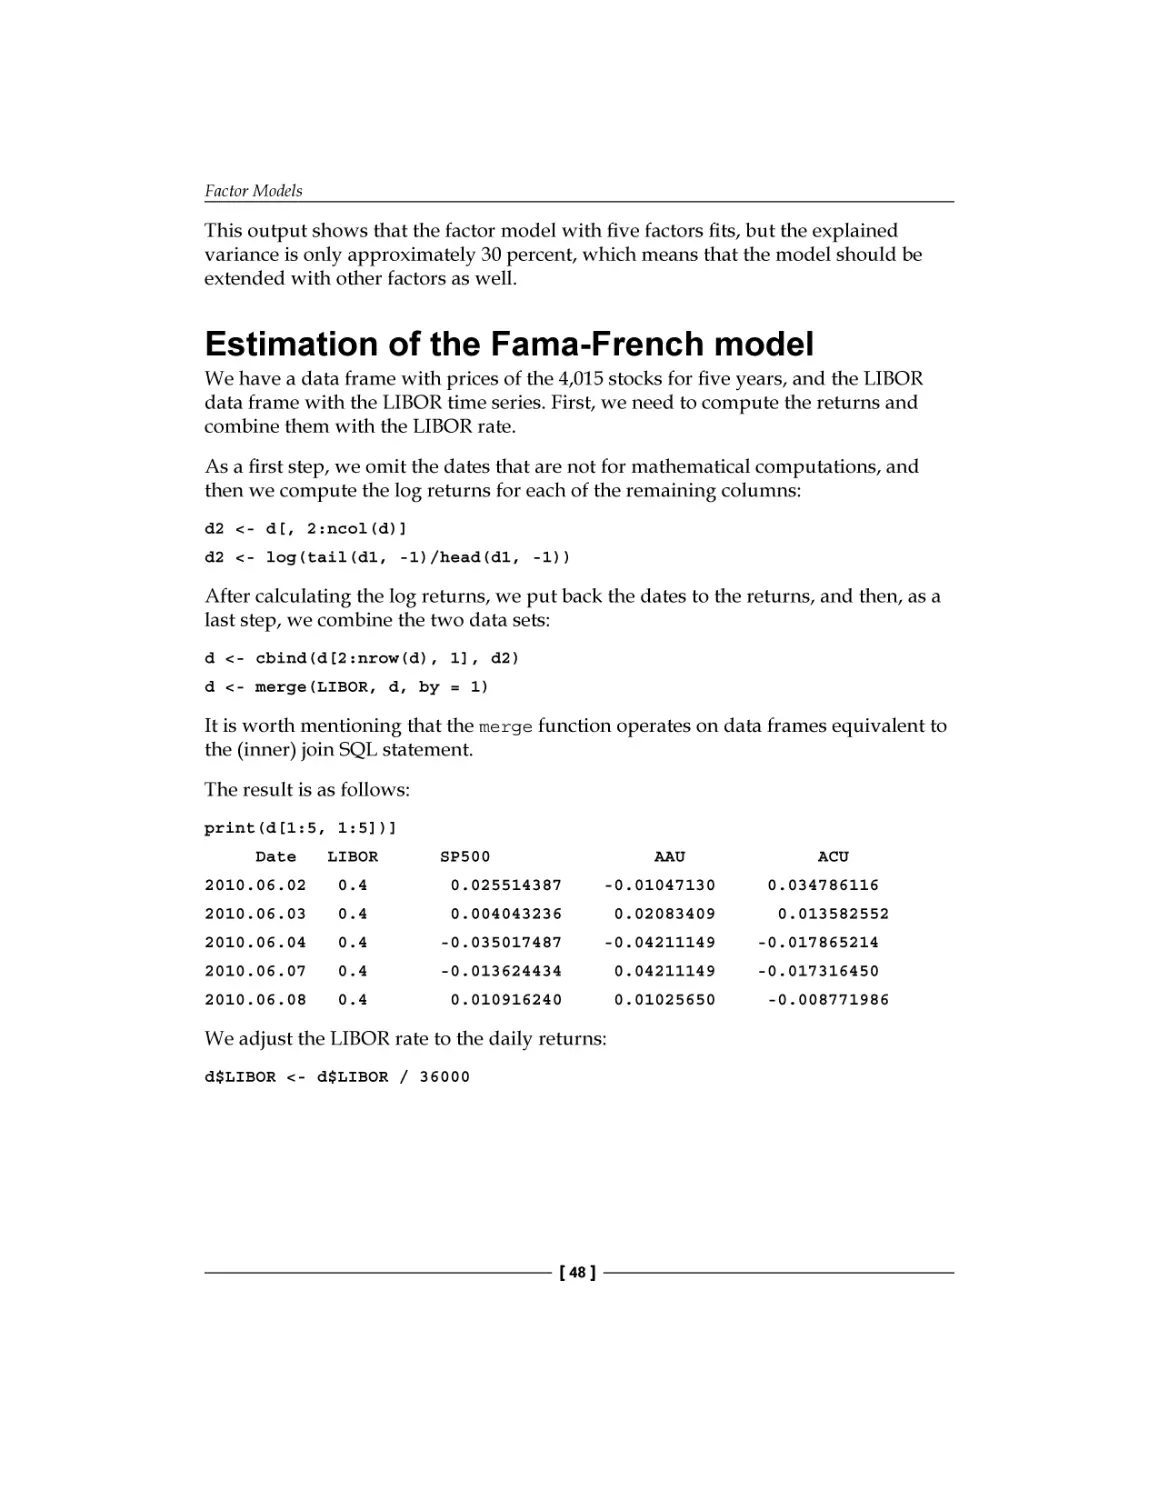 Estimation of the Fama-French model